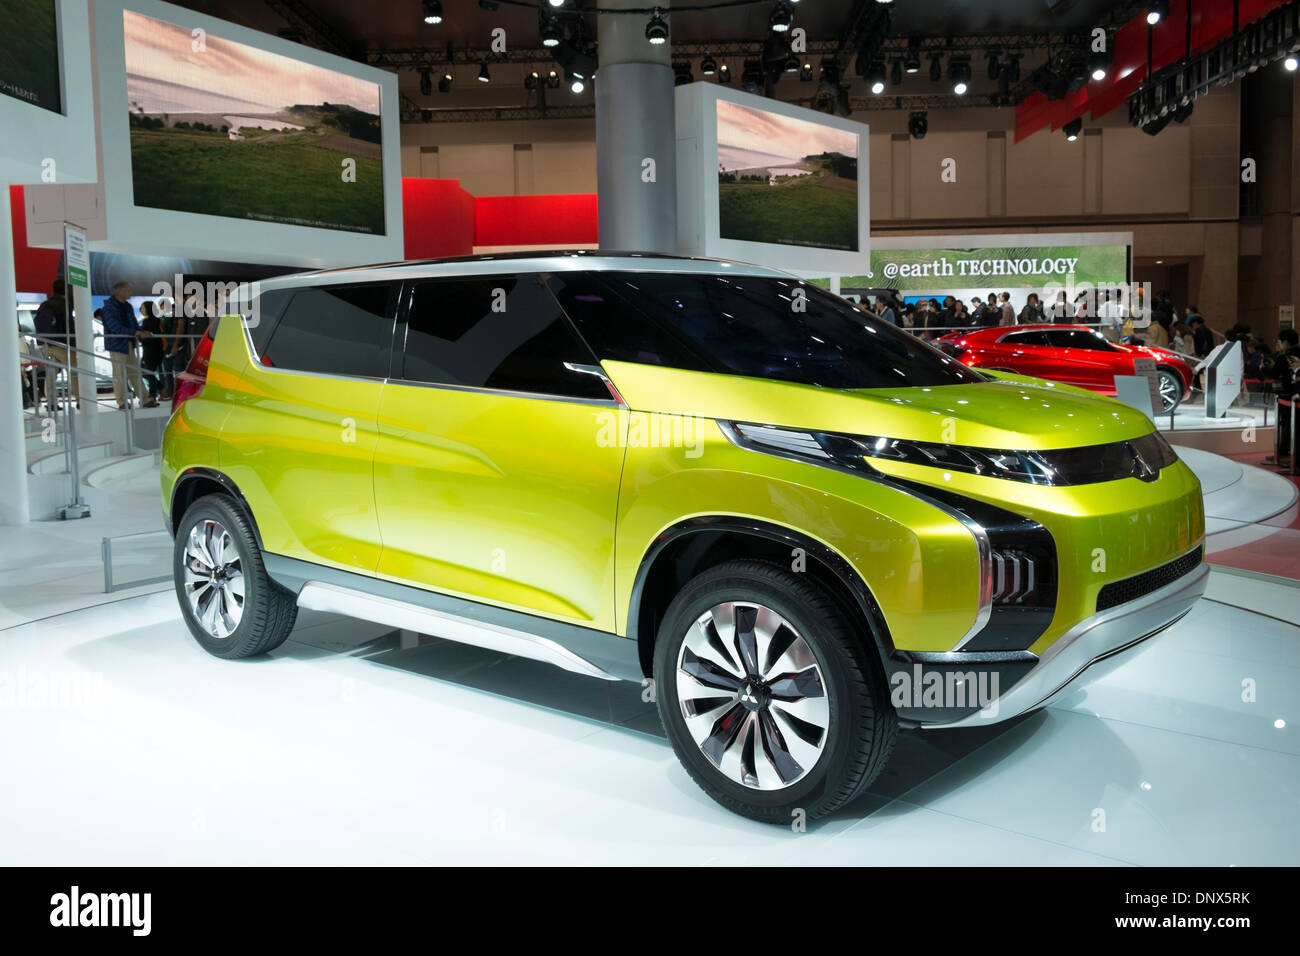 Mitsubishi AR concept hybrid electric car at Tokyo Motor Show 2013 in Japan Stock Photo